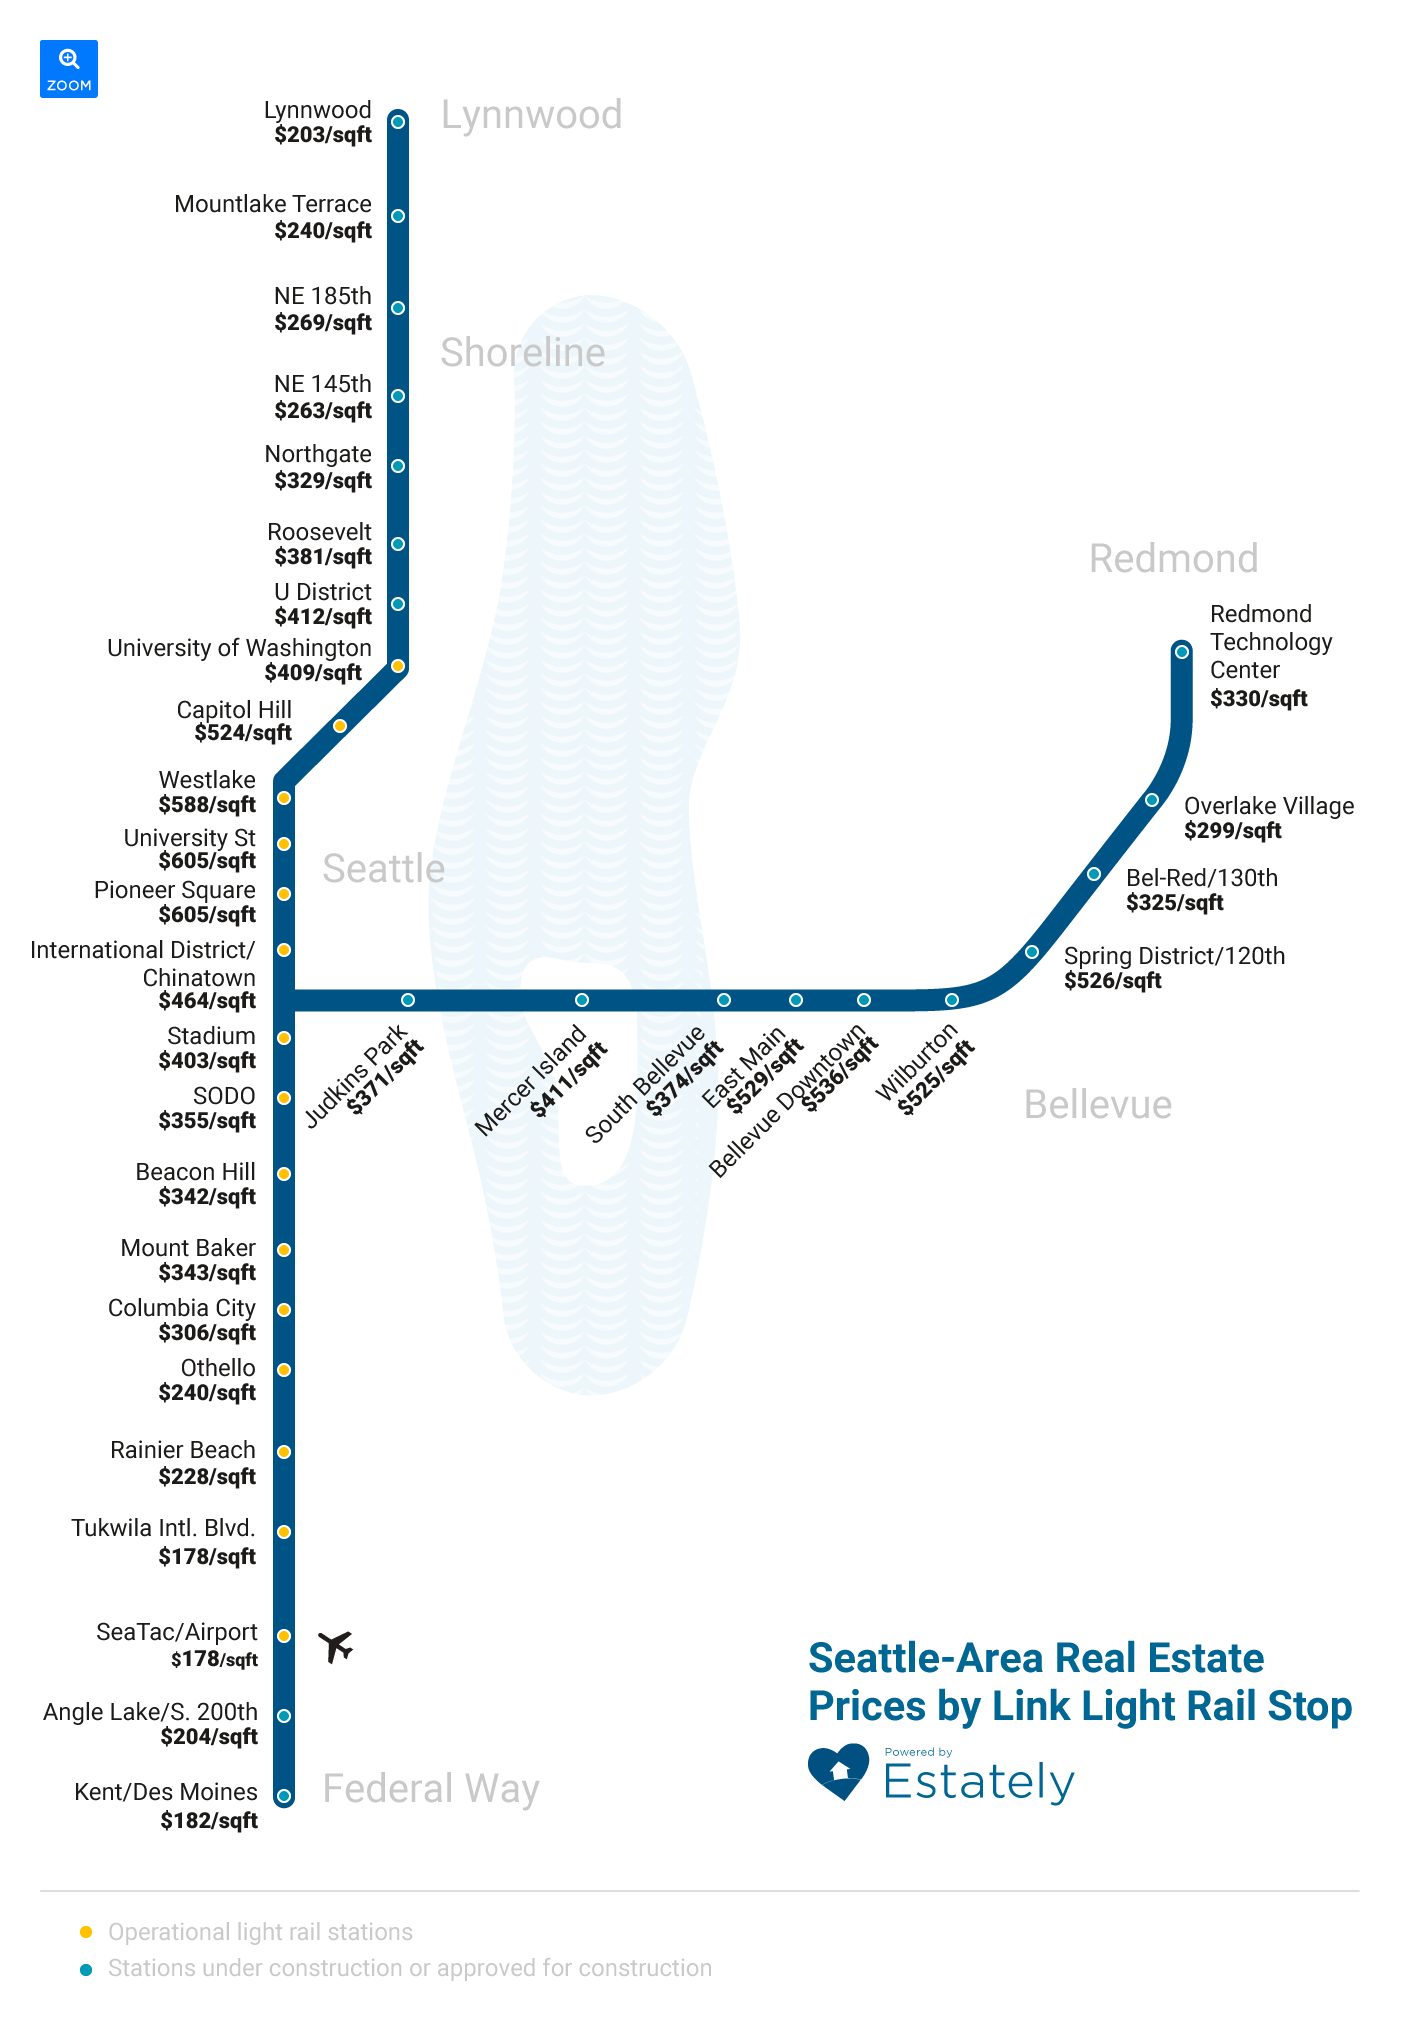 Seattle Area Home Prices by Transit Stop